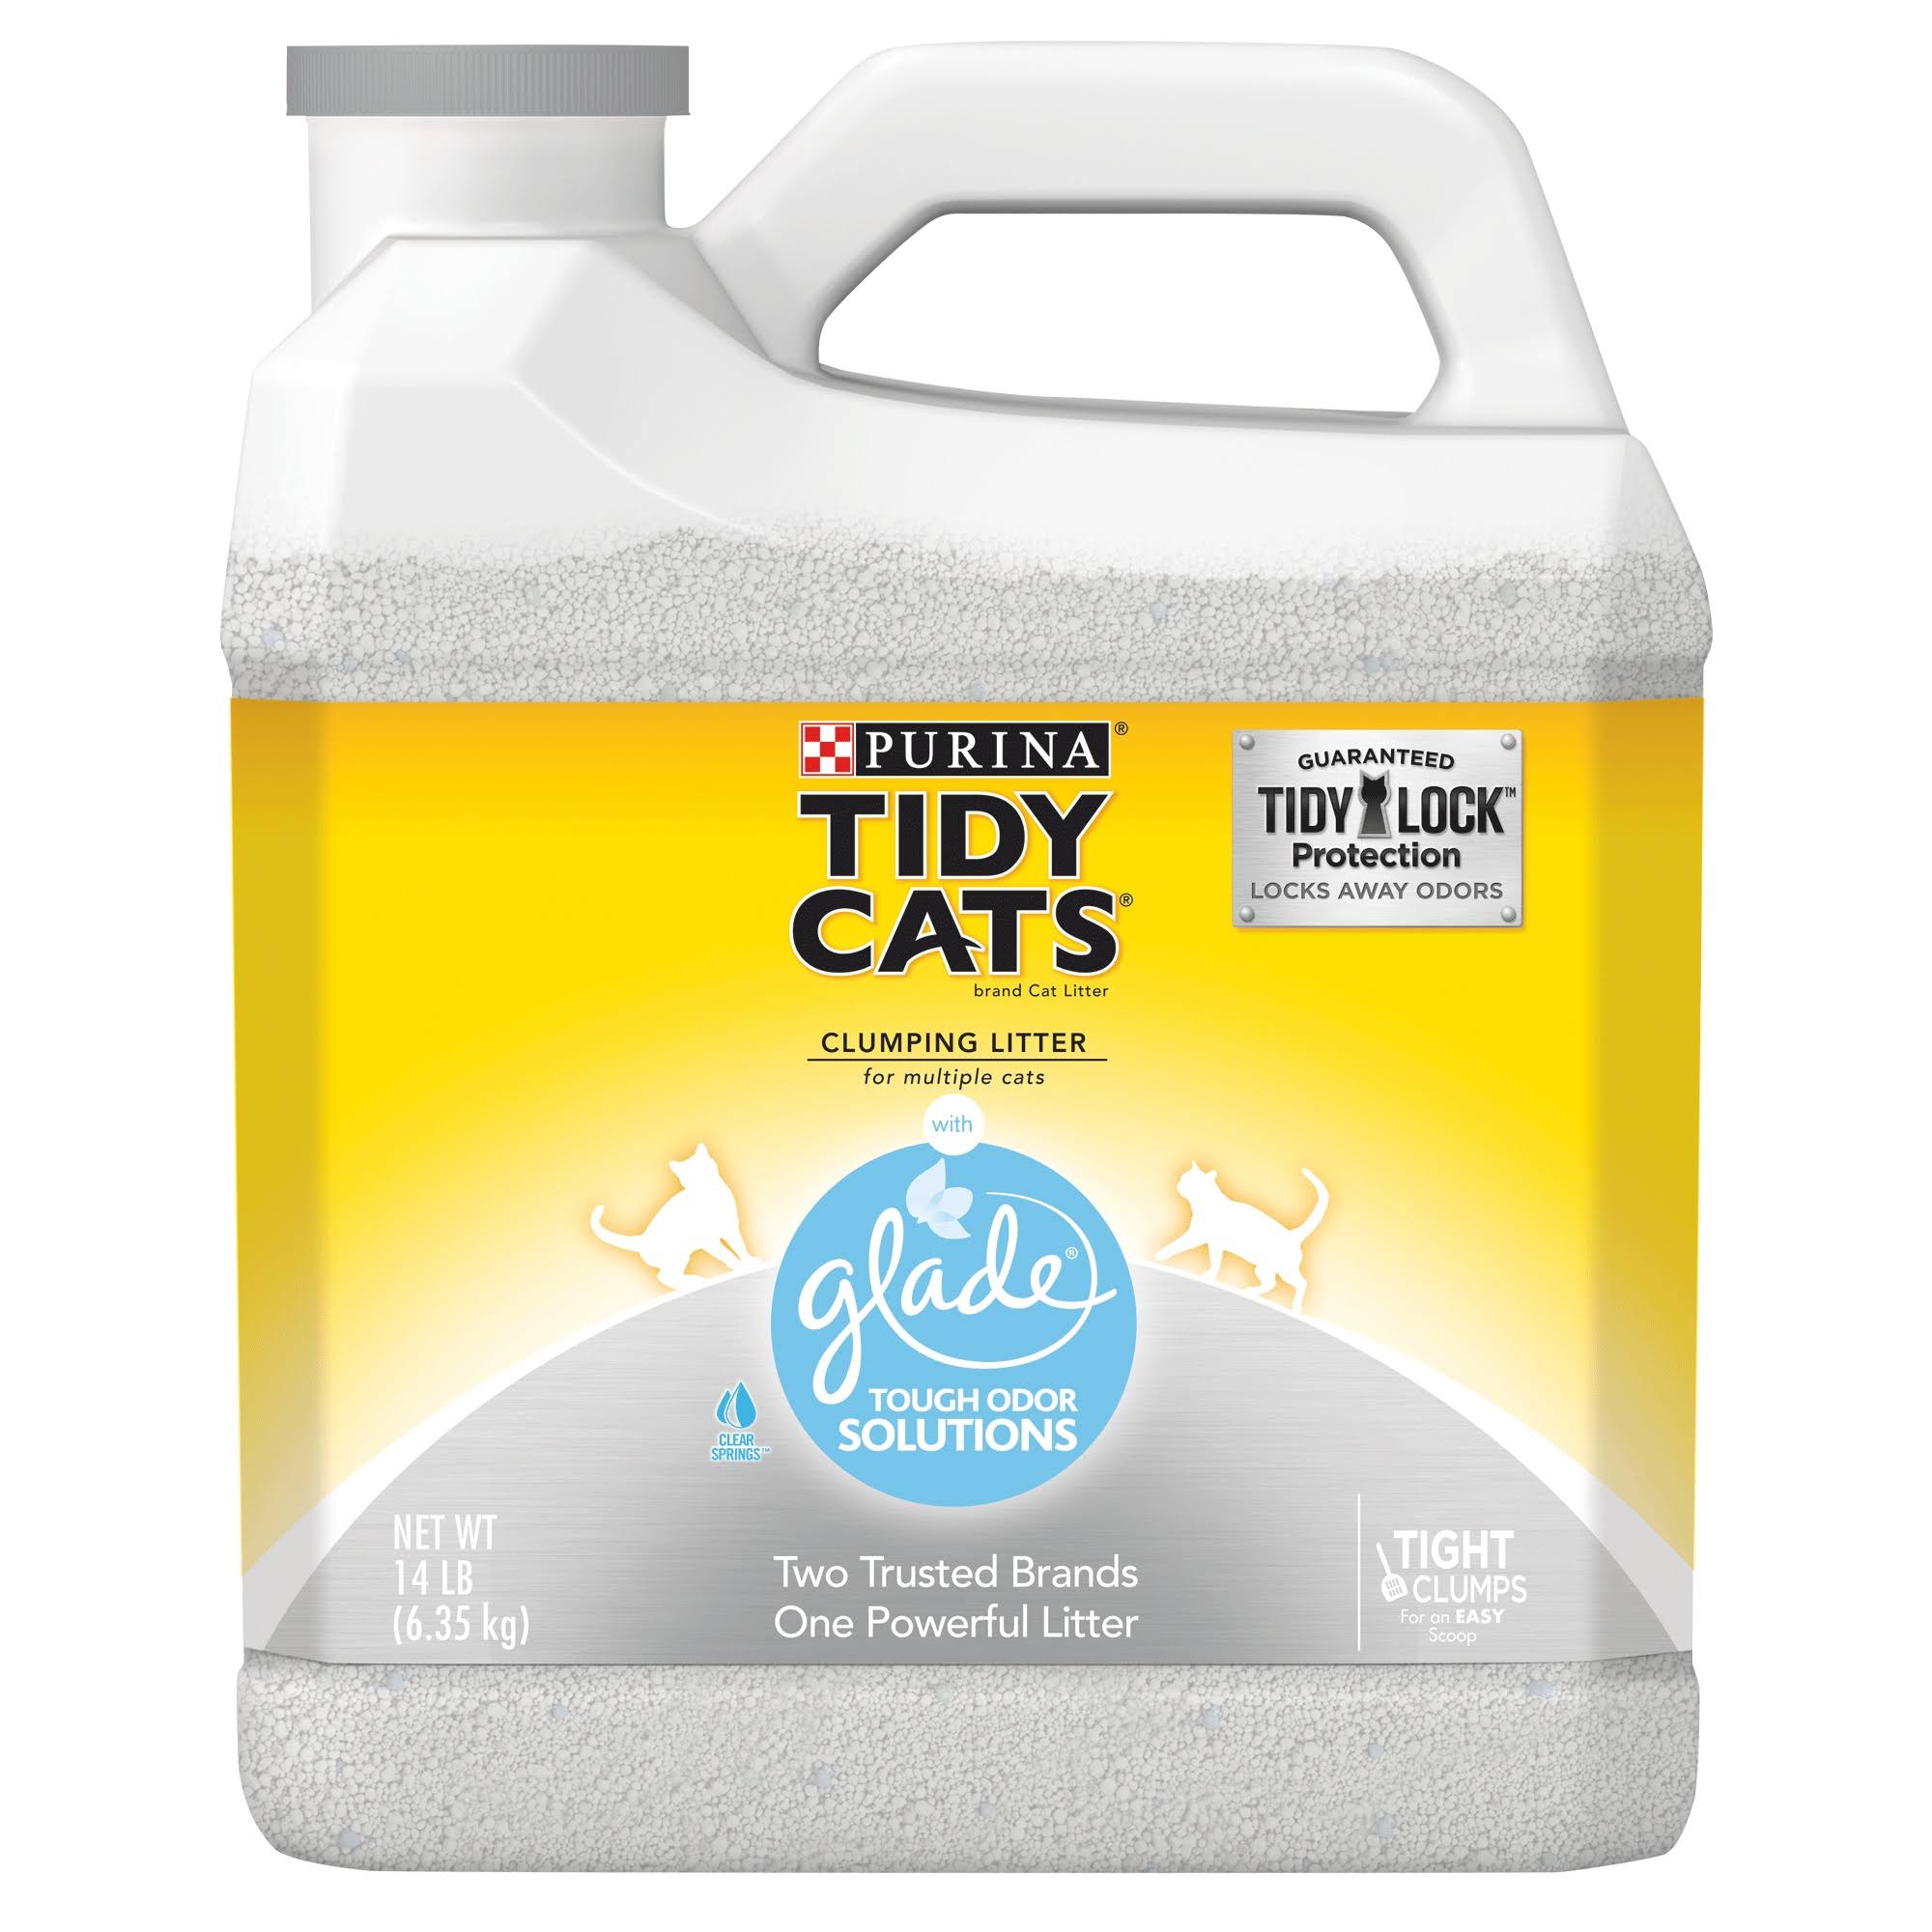 Purina Tidy Cats Litter with Glade - 14lb